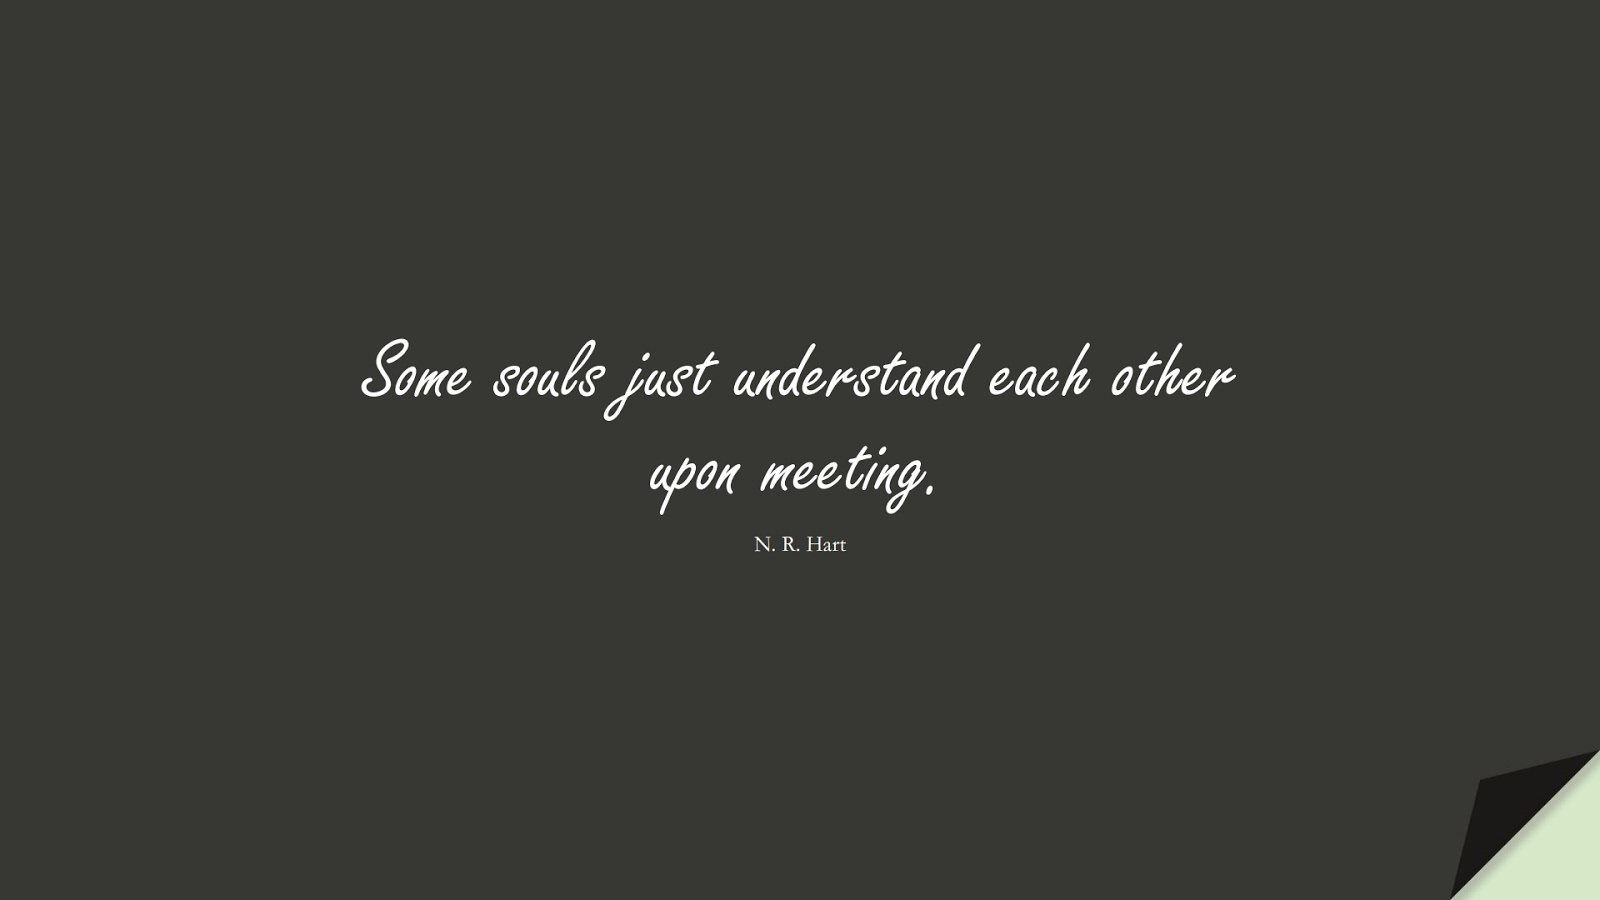 Some souls just understand each other upon meeting. (N. R. Hart);  #LoveQuotes